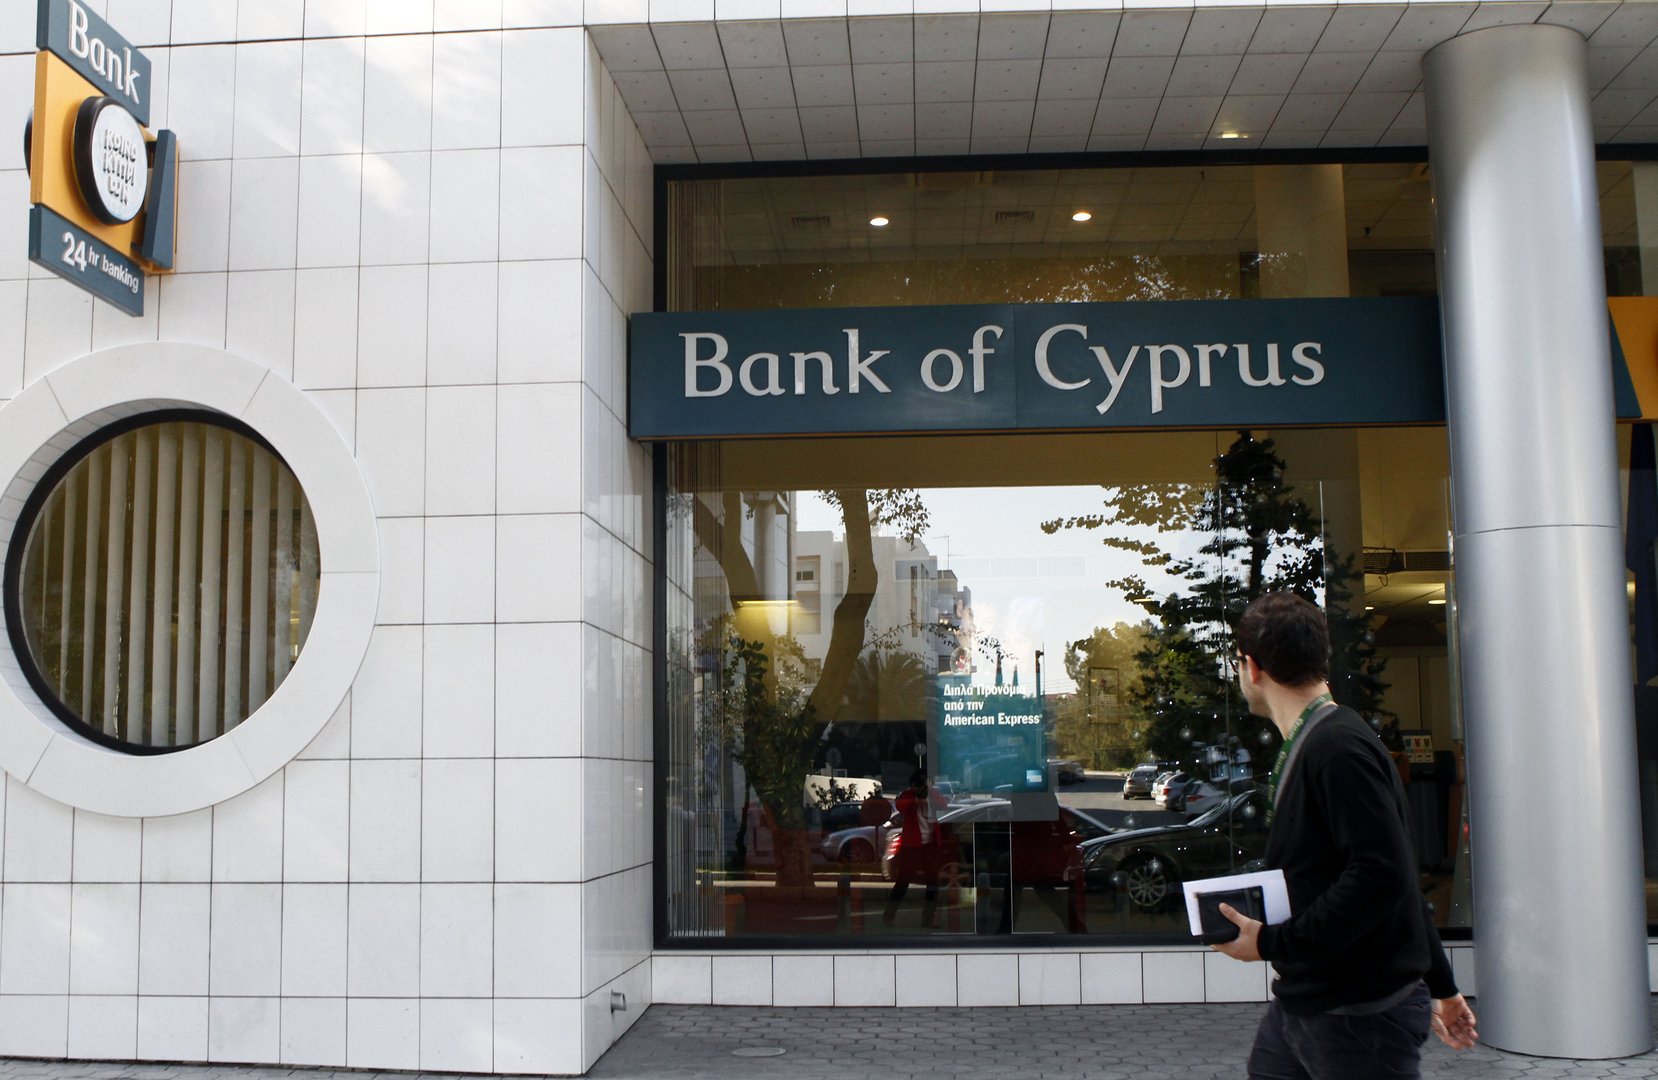 image Adverse scenario for Cyprus banks drawn up as part of EU stress tests